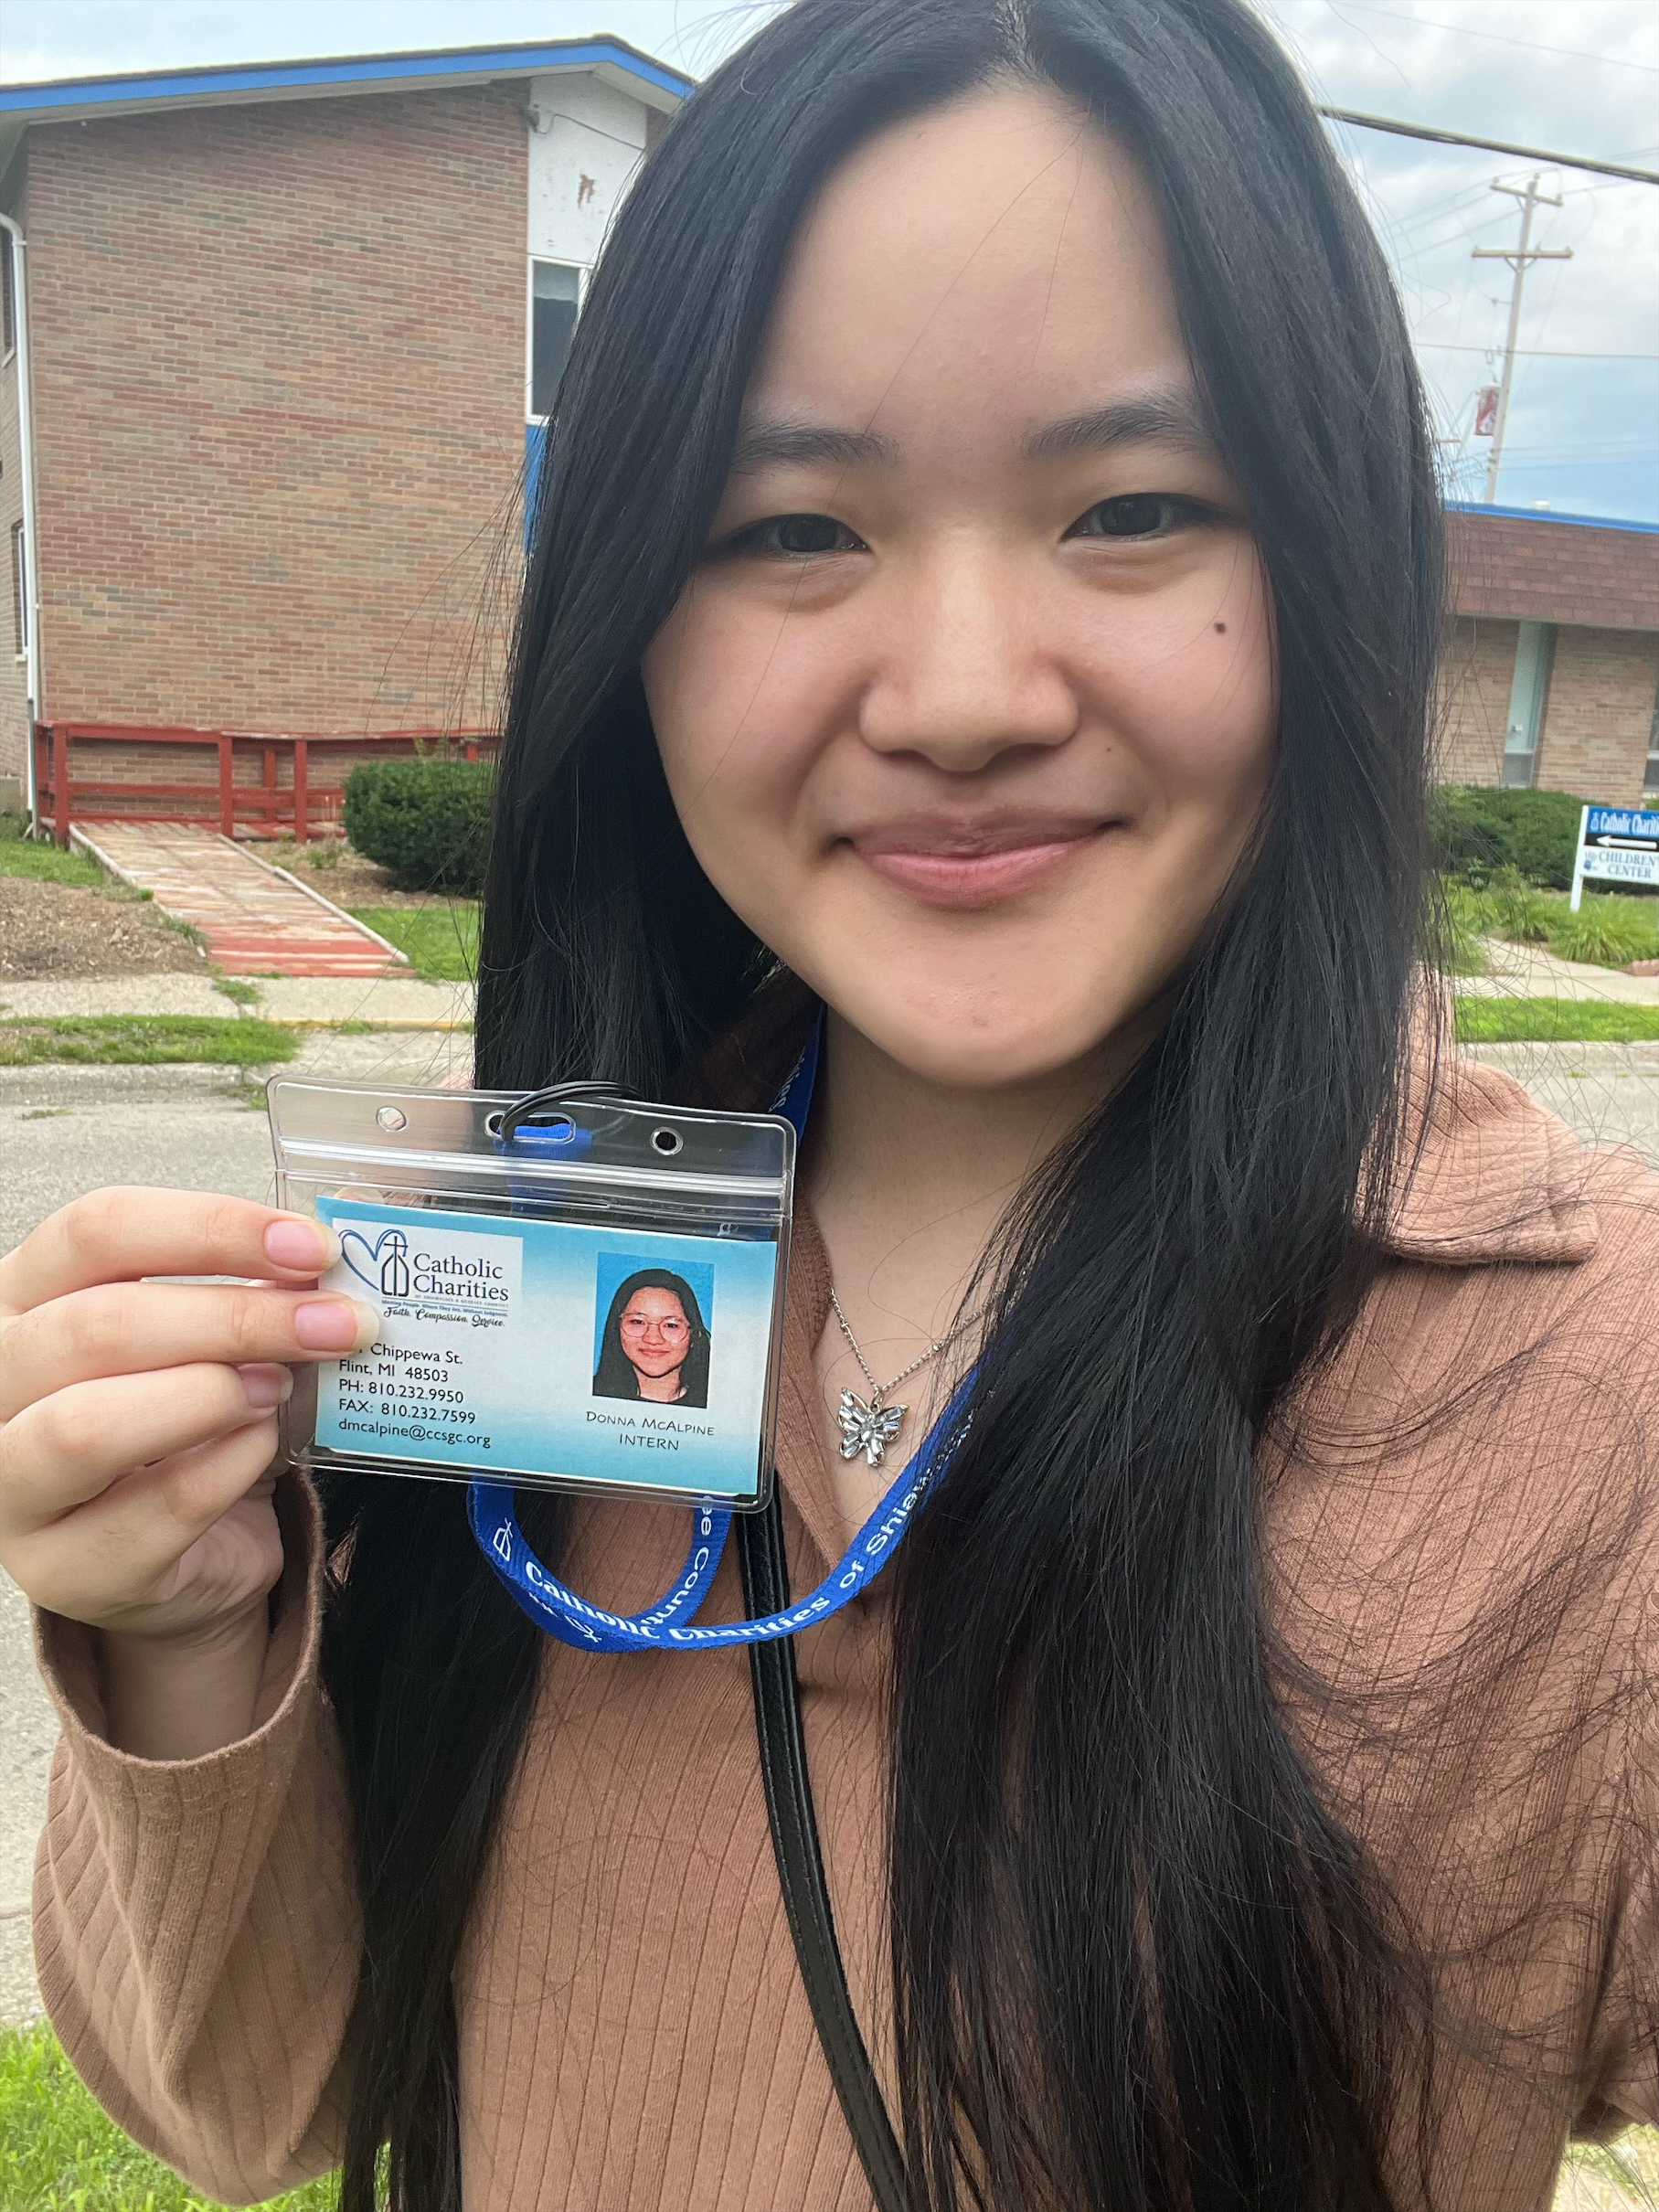 Donna holds her id badge up outside of the Catholic Charities building